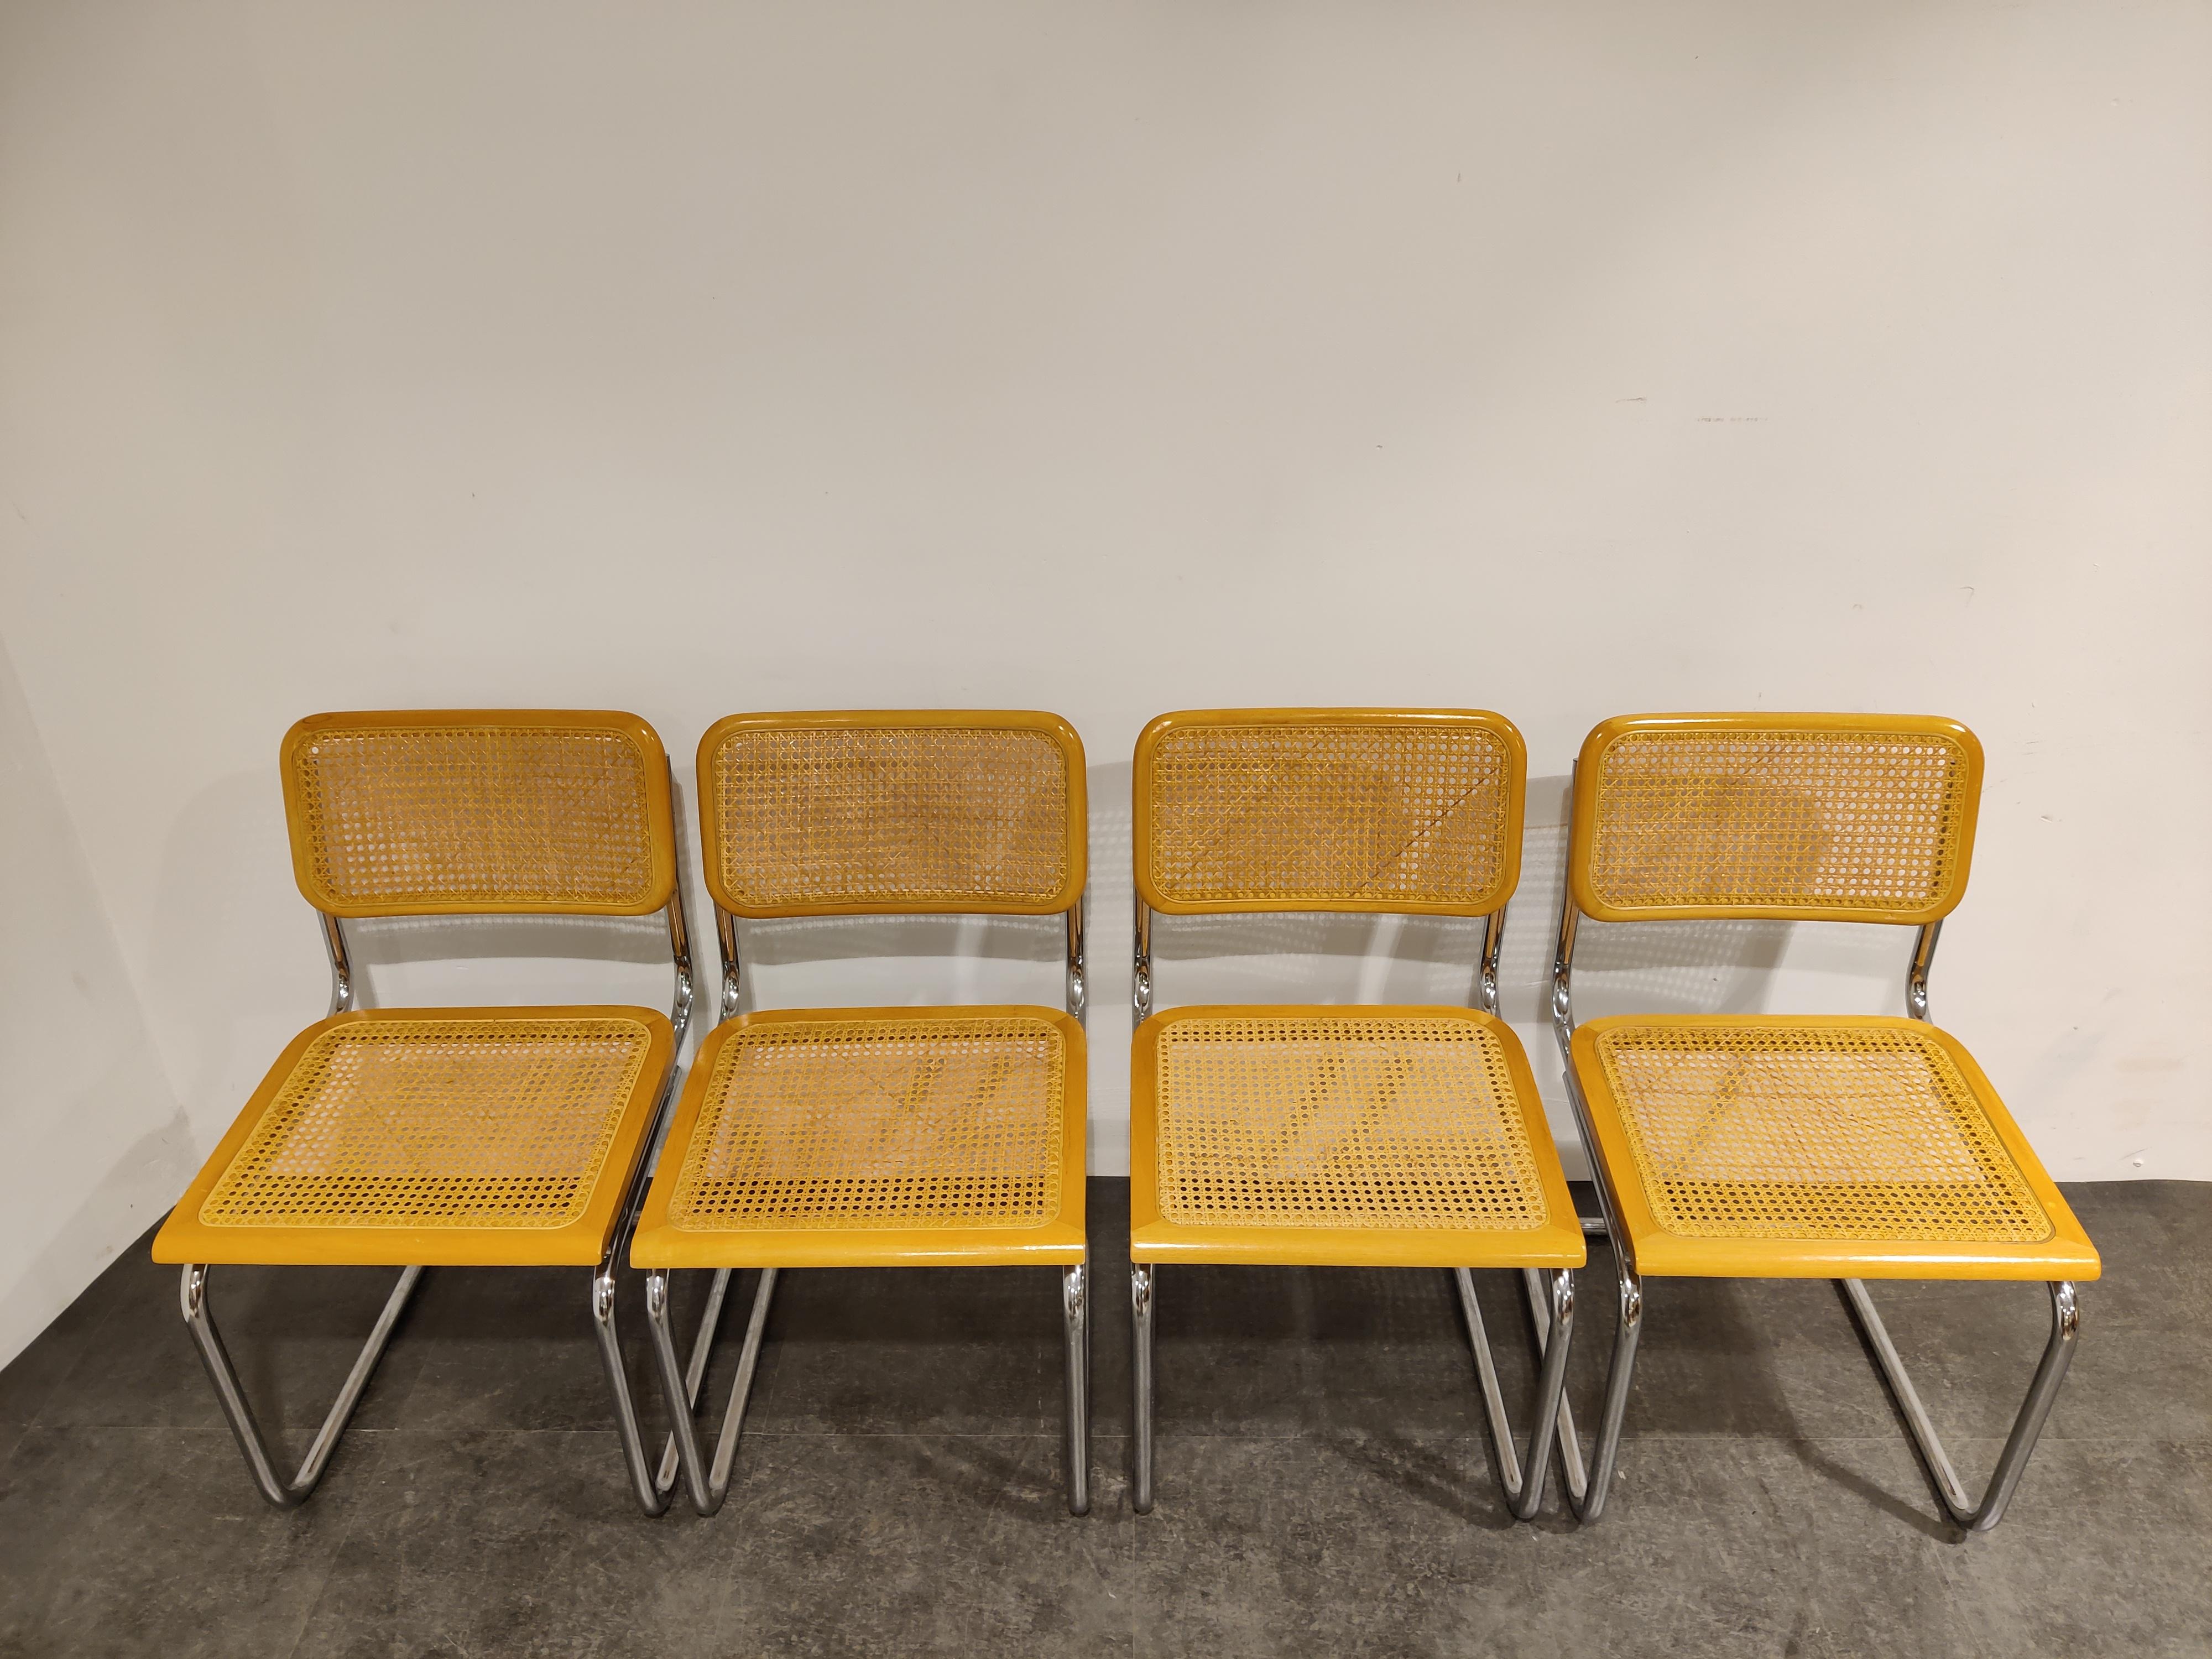 Bauhaus Set of 4 Vintage Marcel Breuer Style Cesca Chairs, Made in Italy, 1970s